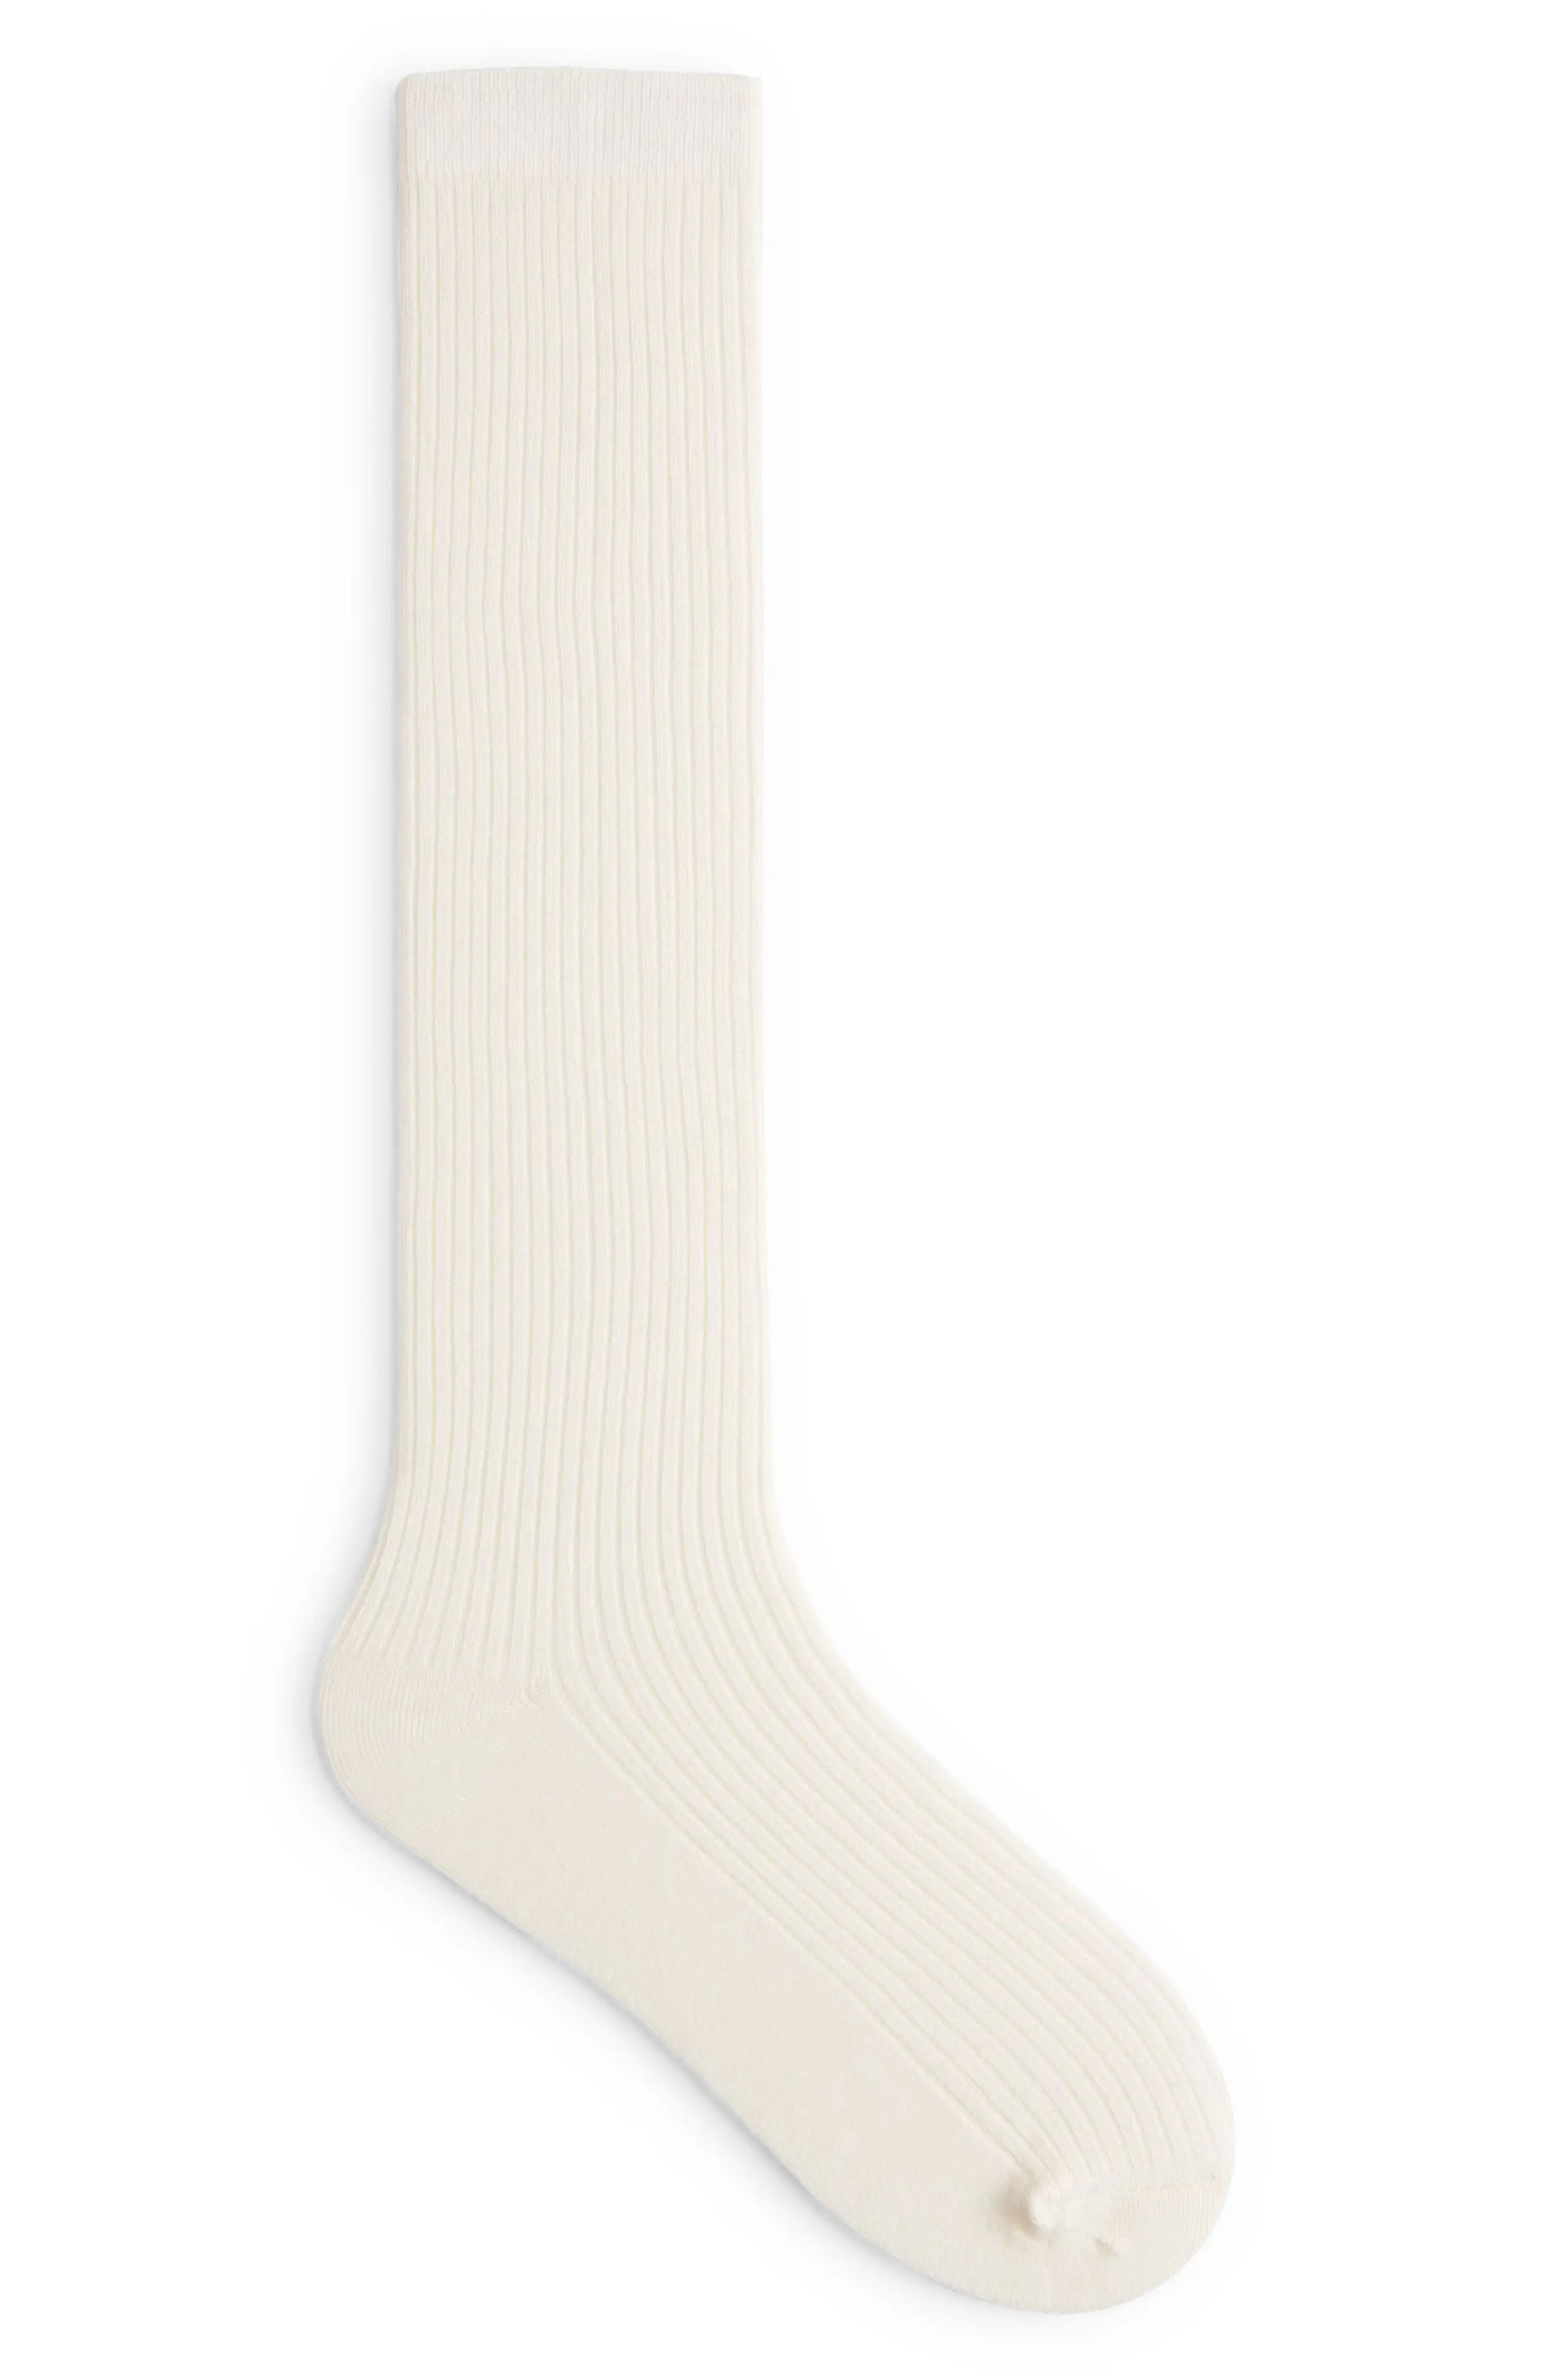 & Other Stories Ribbed Knee High Socks, Size 5-7 in Offwhite at Nordstrom | Nordstrom